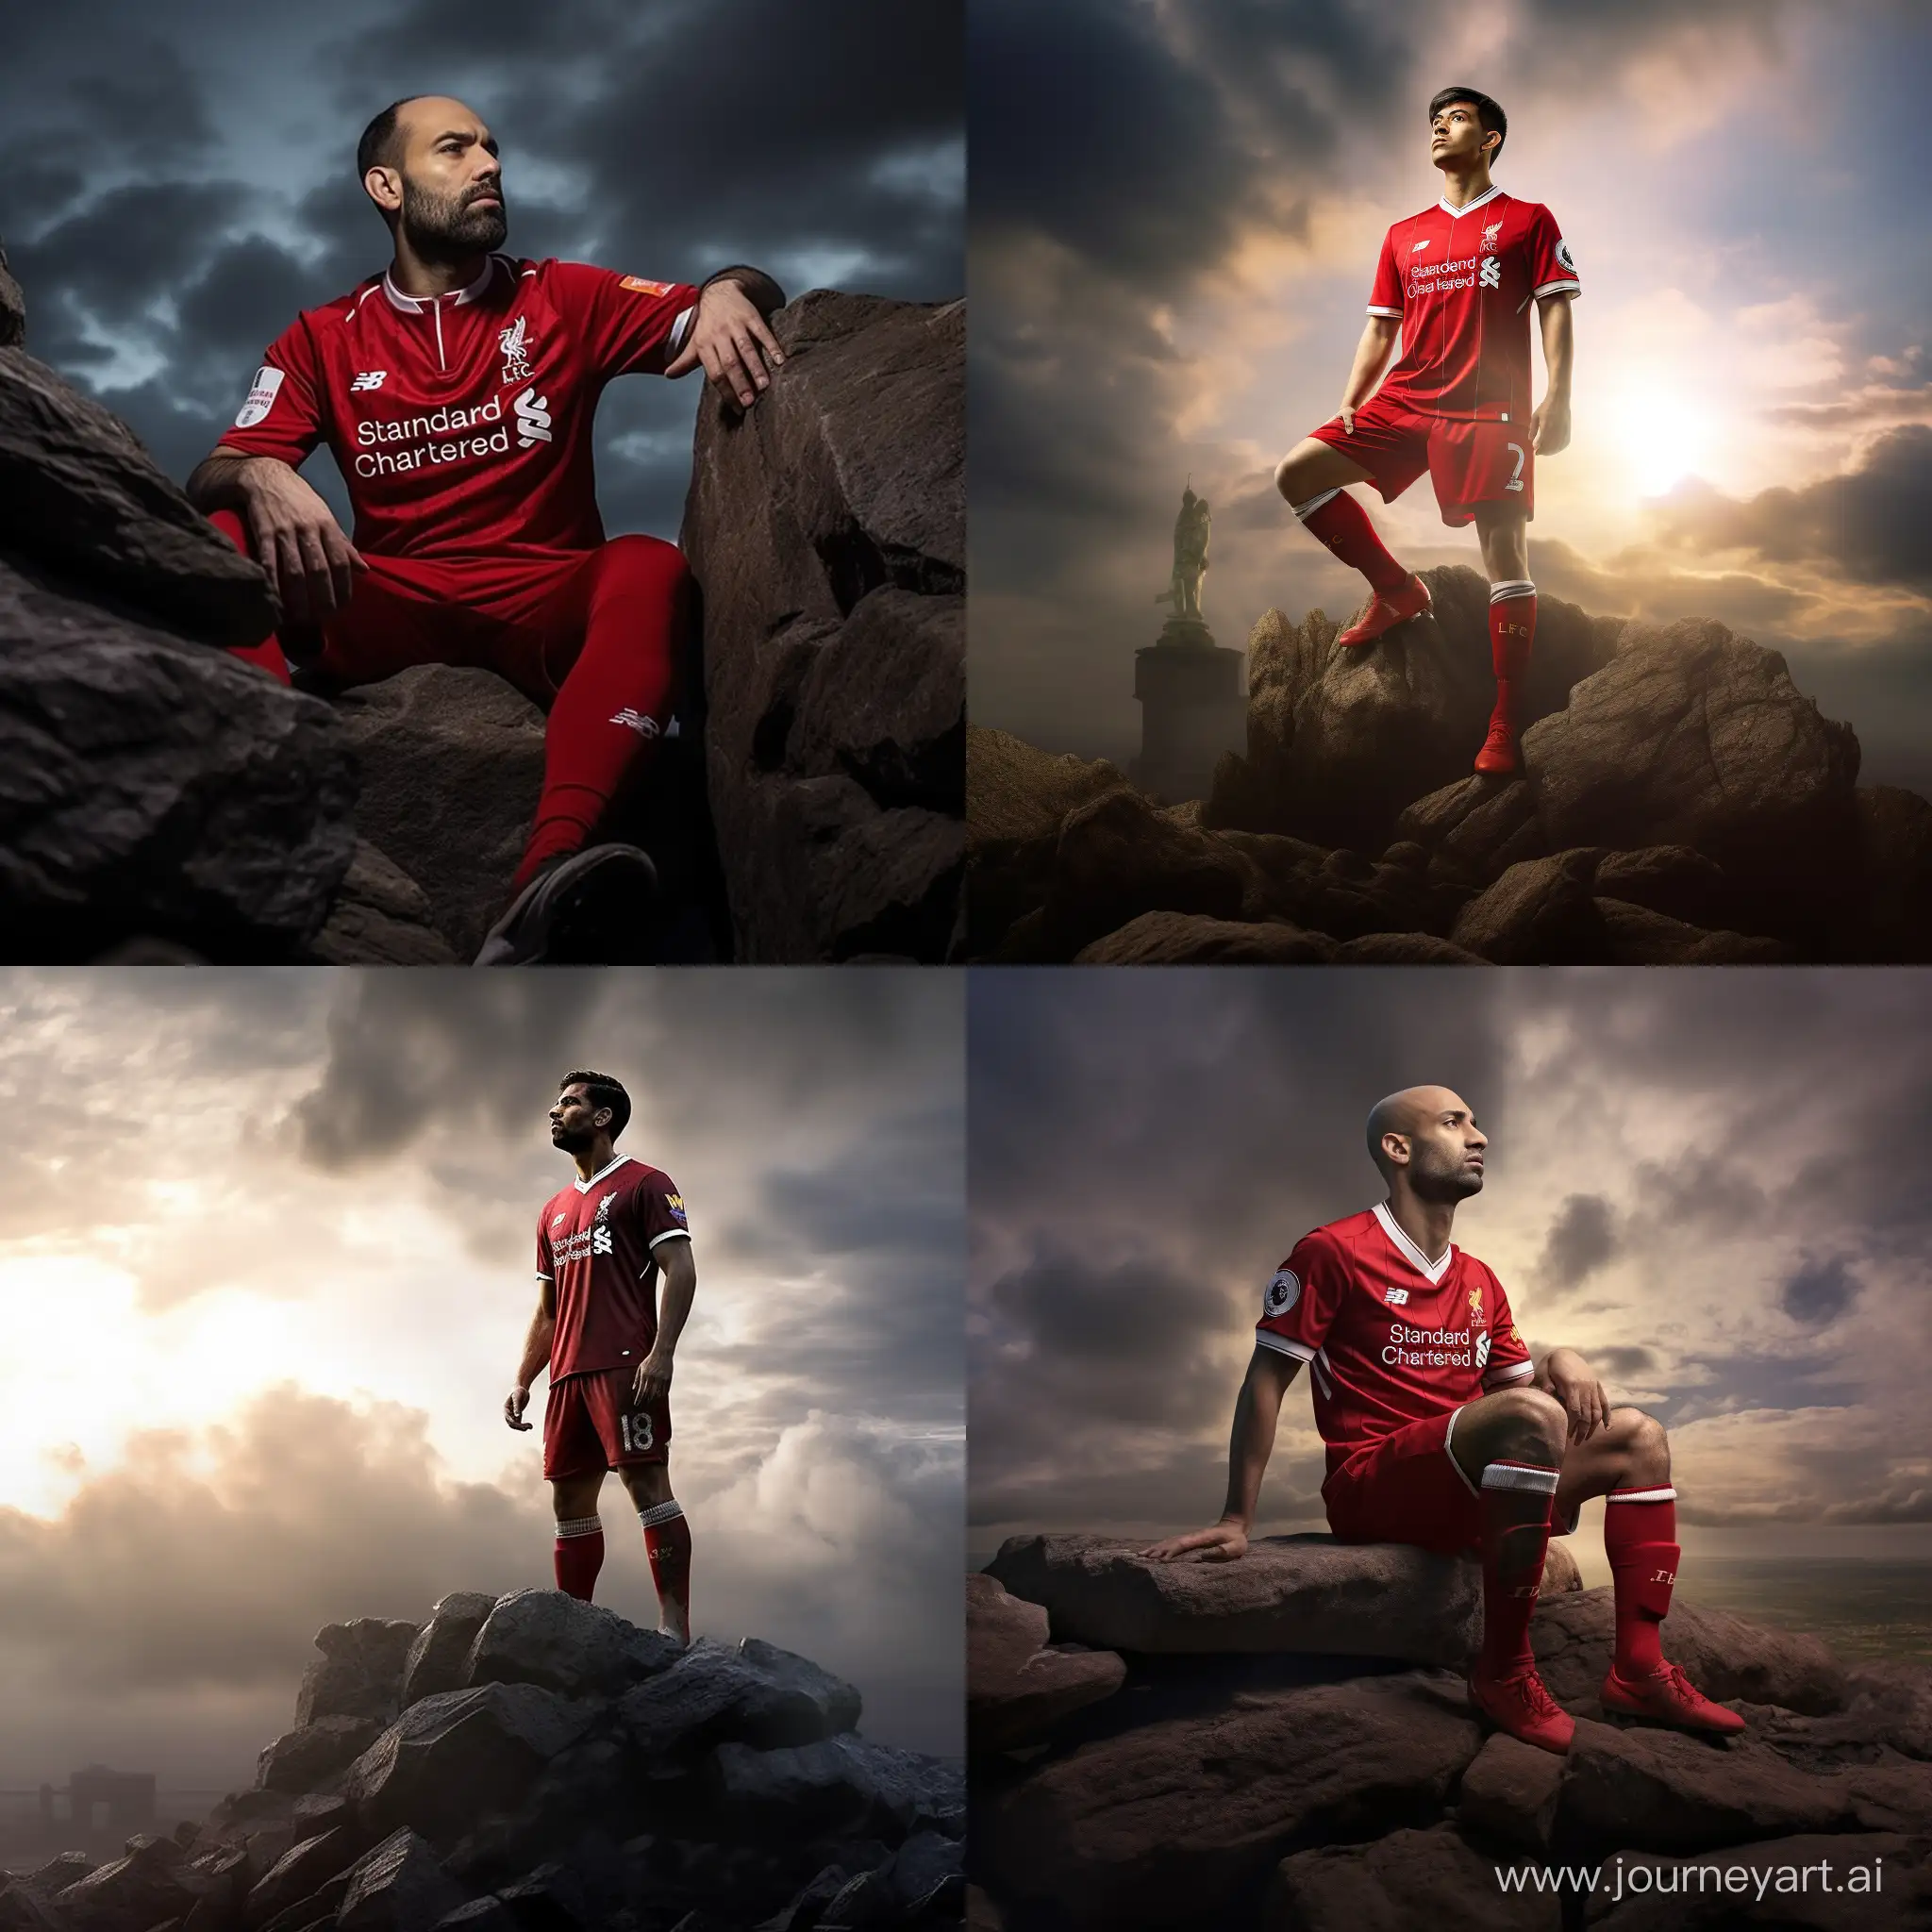 Capture a breathtaking cinematic scene where Muhammed salah perches regally atop a rugged rock formation, resembling a king surveying its kingdom. The man should be adorned in the iconic Liverpool FC attire, featuring a meticulously detailed Liverpool FC jersey.  the rugged beauty of the rock, and the dynamic essence of the Liverpool FC jersey. Pay close attention to lighting, shadows, and textures to achieve a realistic and visually stunning image that seamlessly blends the natural world with the spirit of Liverpool FC. Bring forth a sense of majesty and pride, as if the man itself is a symbol of the team's strength and triumph. The final image should evoke a cinematic atmosphere that transports viewers into this unique and captivating moment. should wear liverpool football club red jersey shuld look like muhammed salah with hair
